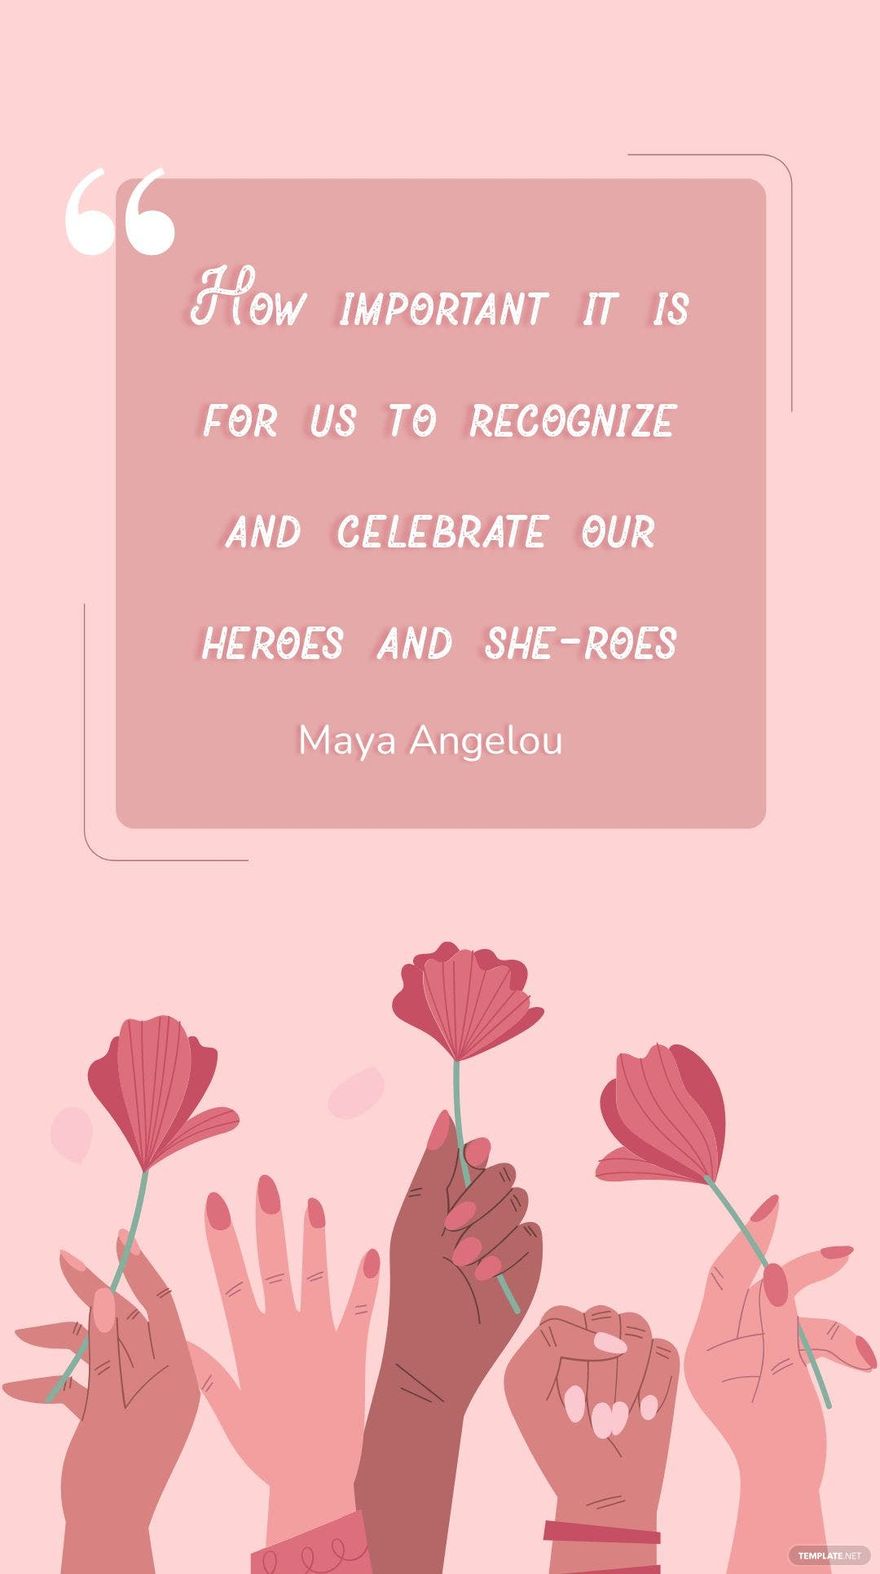 Free Maya Angelou - How important it is for us to recognize and celebrate our heroes and she-roes in JPG